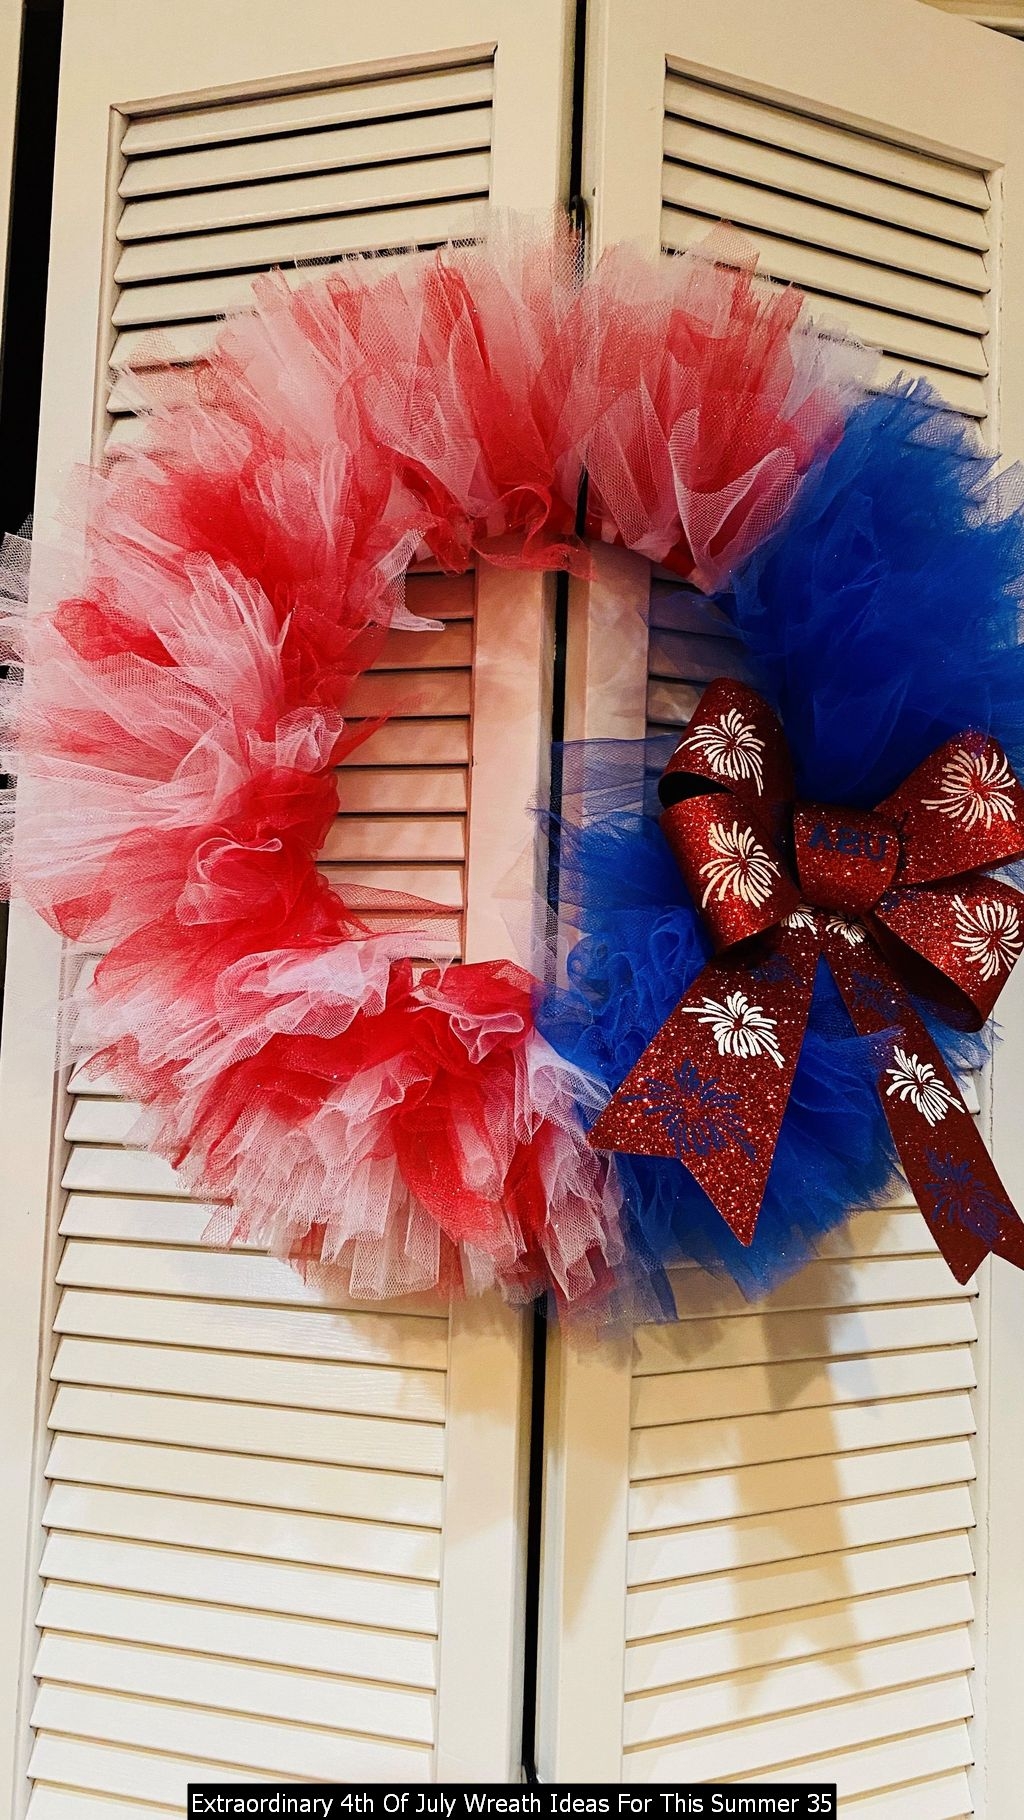 Extraordinary 4th Of July Wreath Ideas For This Summer 35